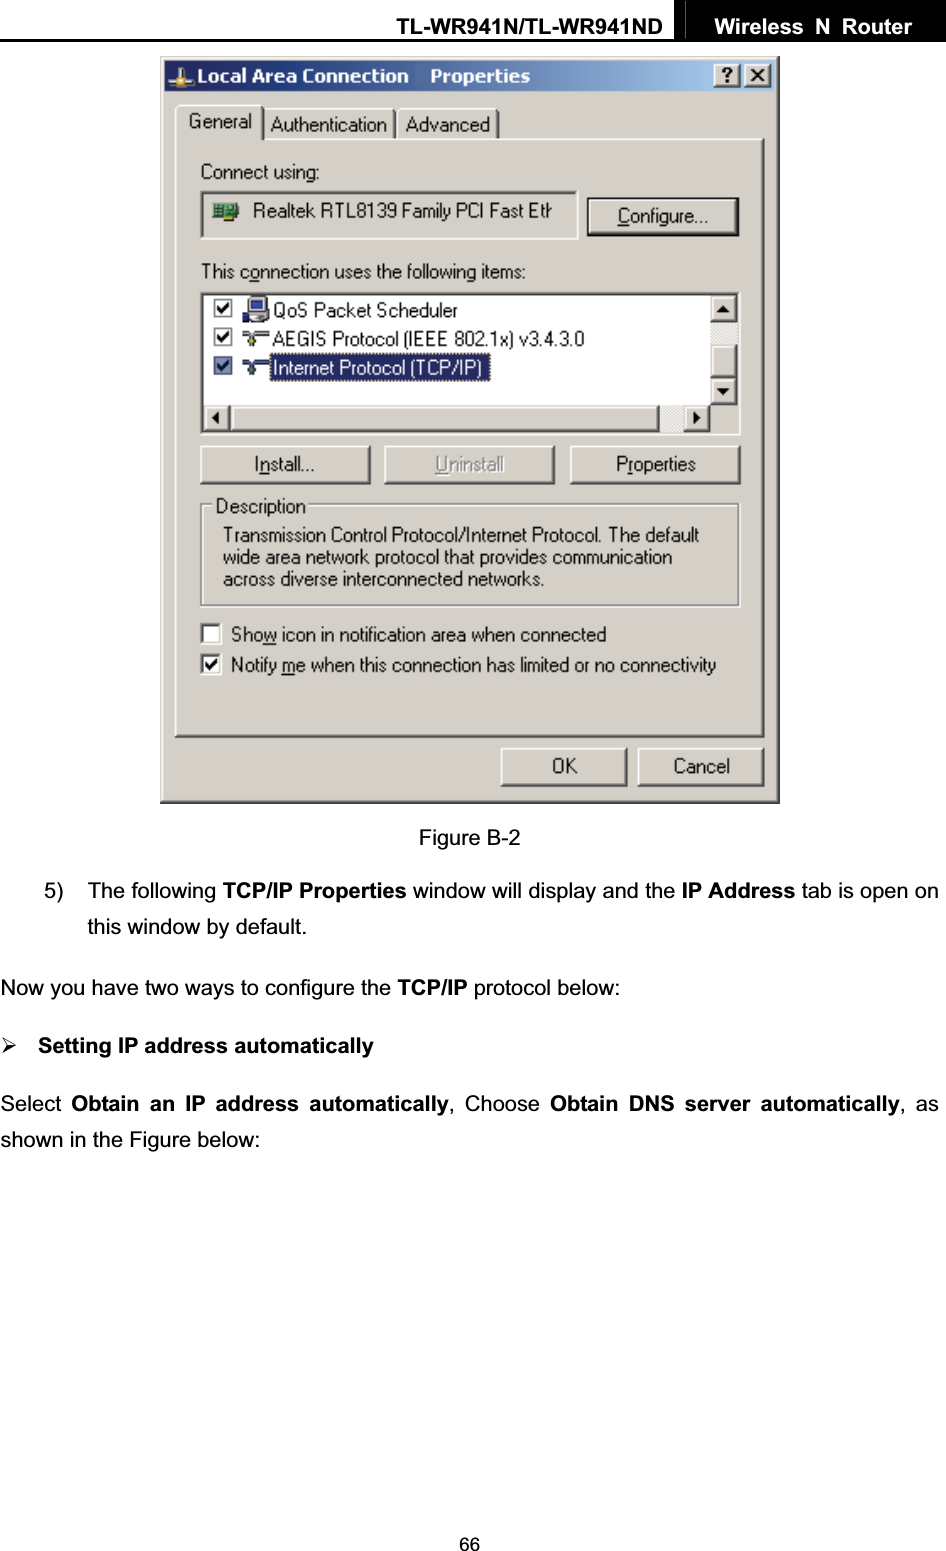 TL-WR941N/TL-WR941ND  Wireless N Router  66Figure B-2 5) The following TCP/IP Properties window will display and the IP Address tab is open on this window by default. Now you have two ways to configure the TCP/IP protocol below: ¾Setting IP address automaticallySelect Obtain an IP address automatically, Choose Obtain DNS server automatically, as shown in the Figure below: 